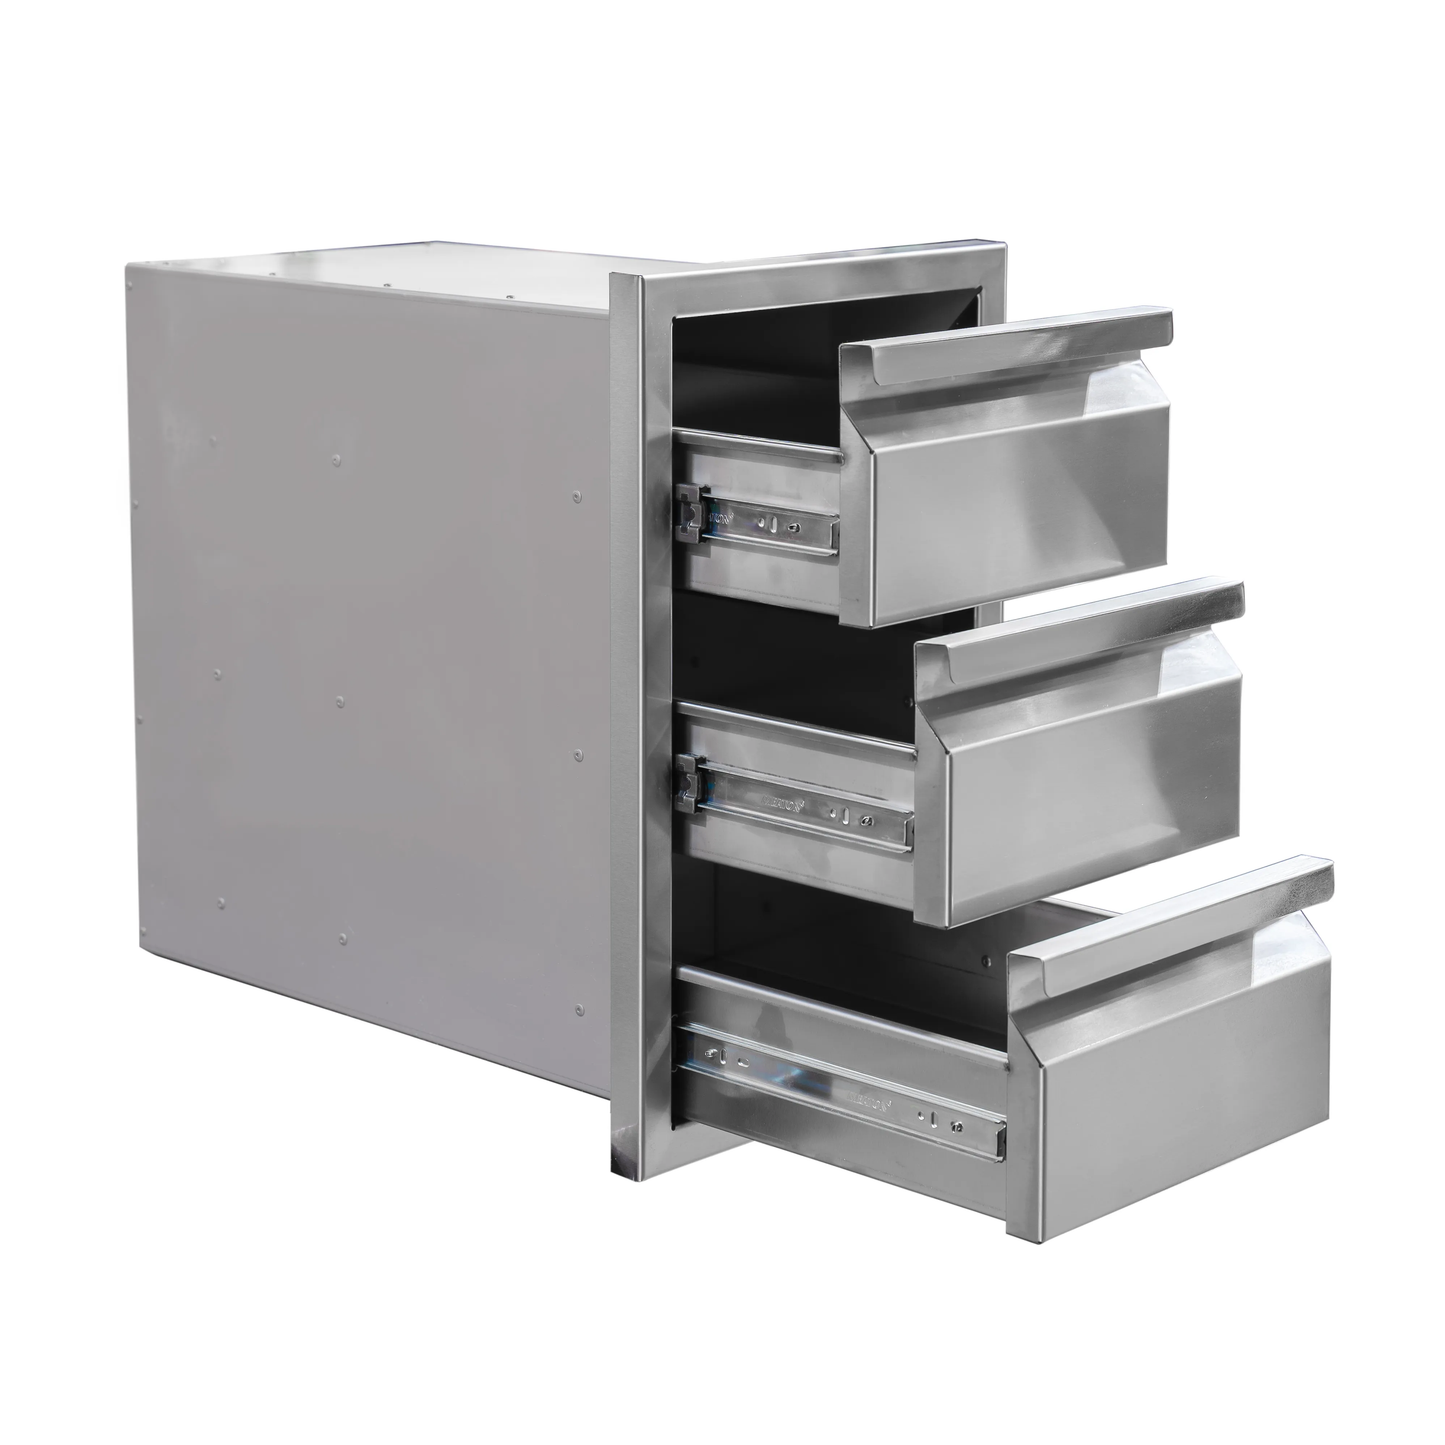 Diamond Grill BBQ Stainless Steel Triple Access Drawers